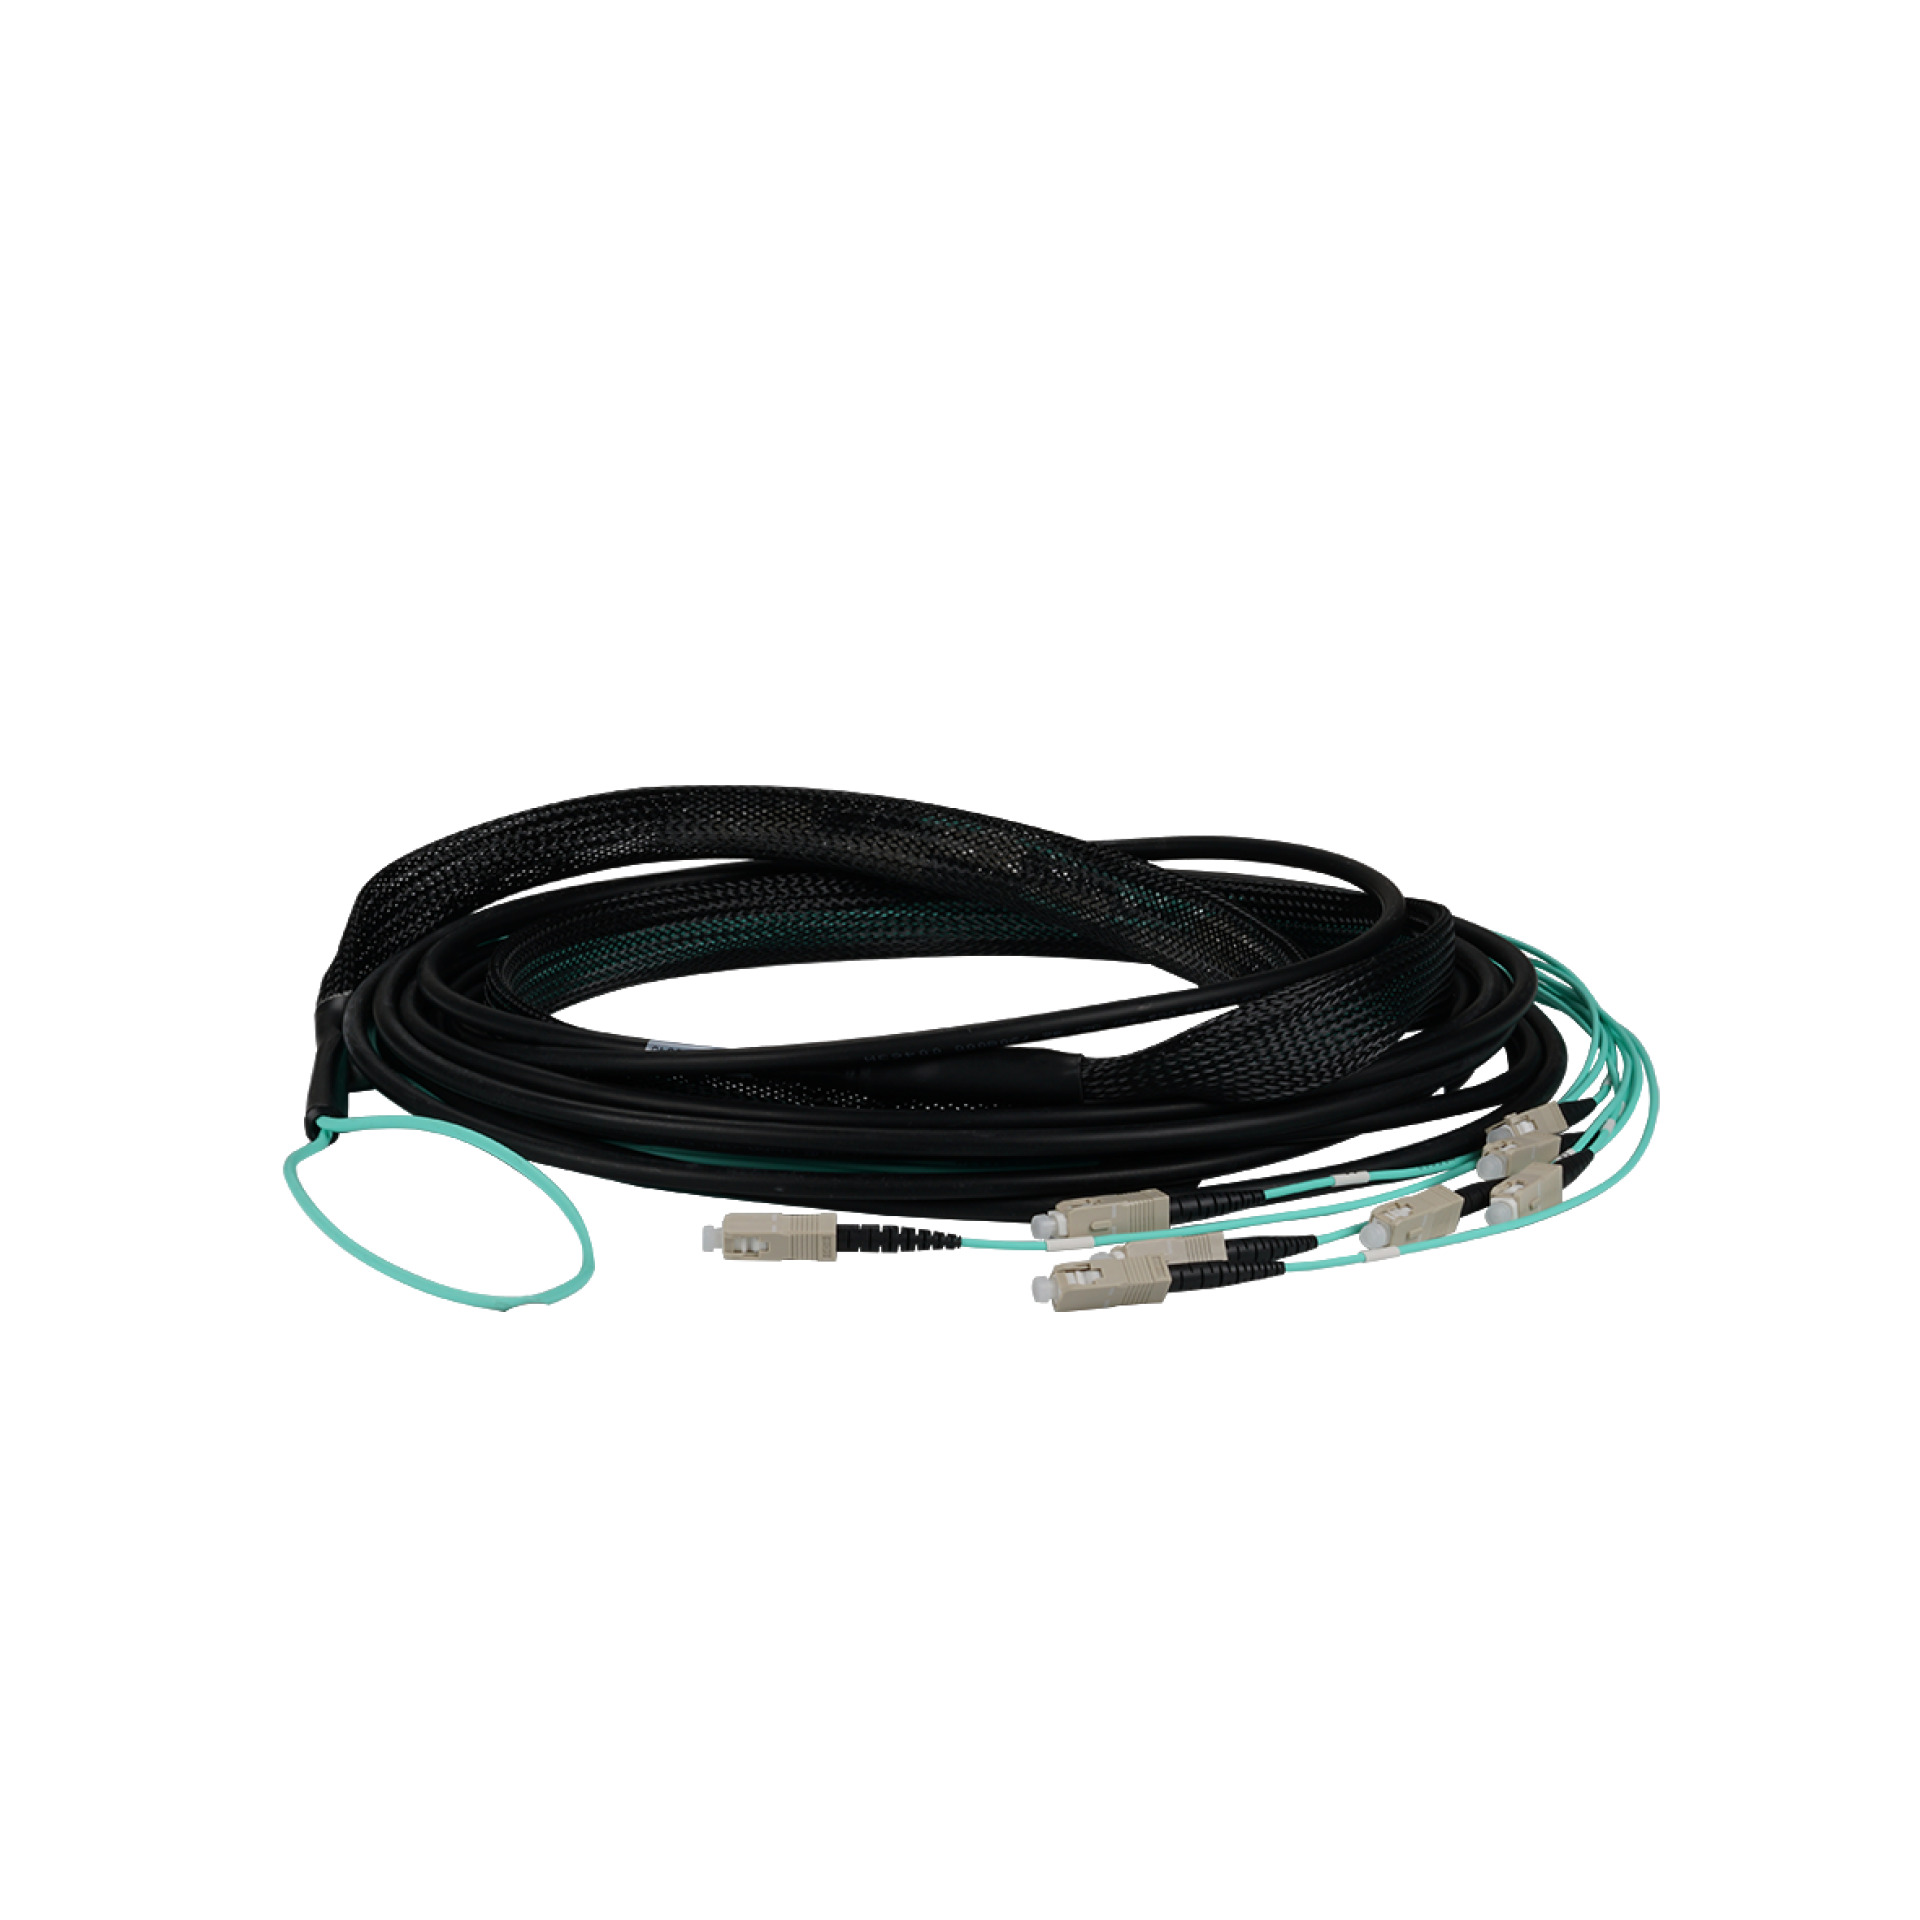 Trunk cable U-DQ(ZN)BH 8G 50/125, SC/SC OM3 150m